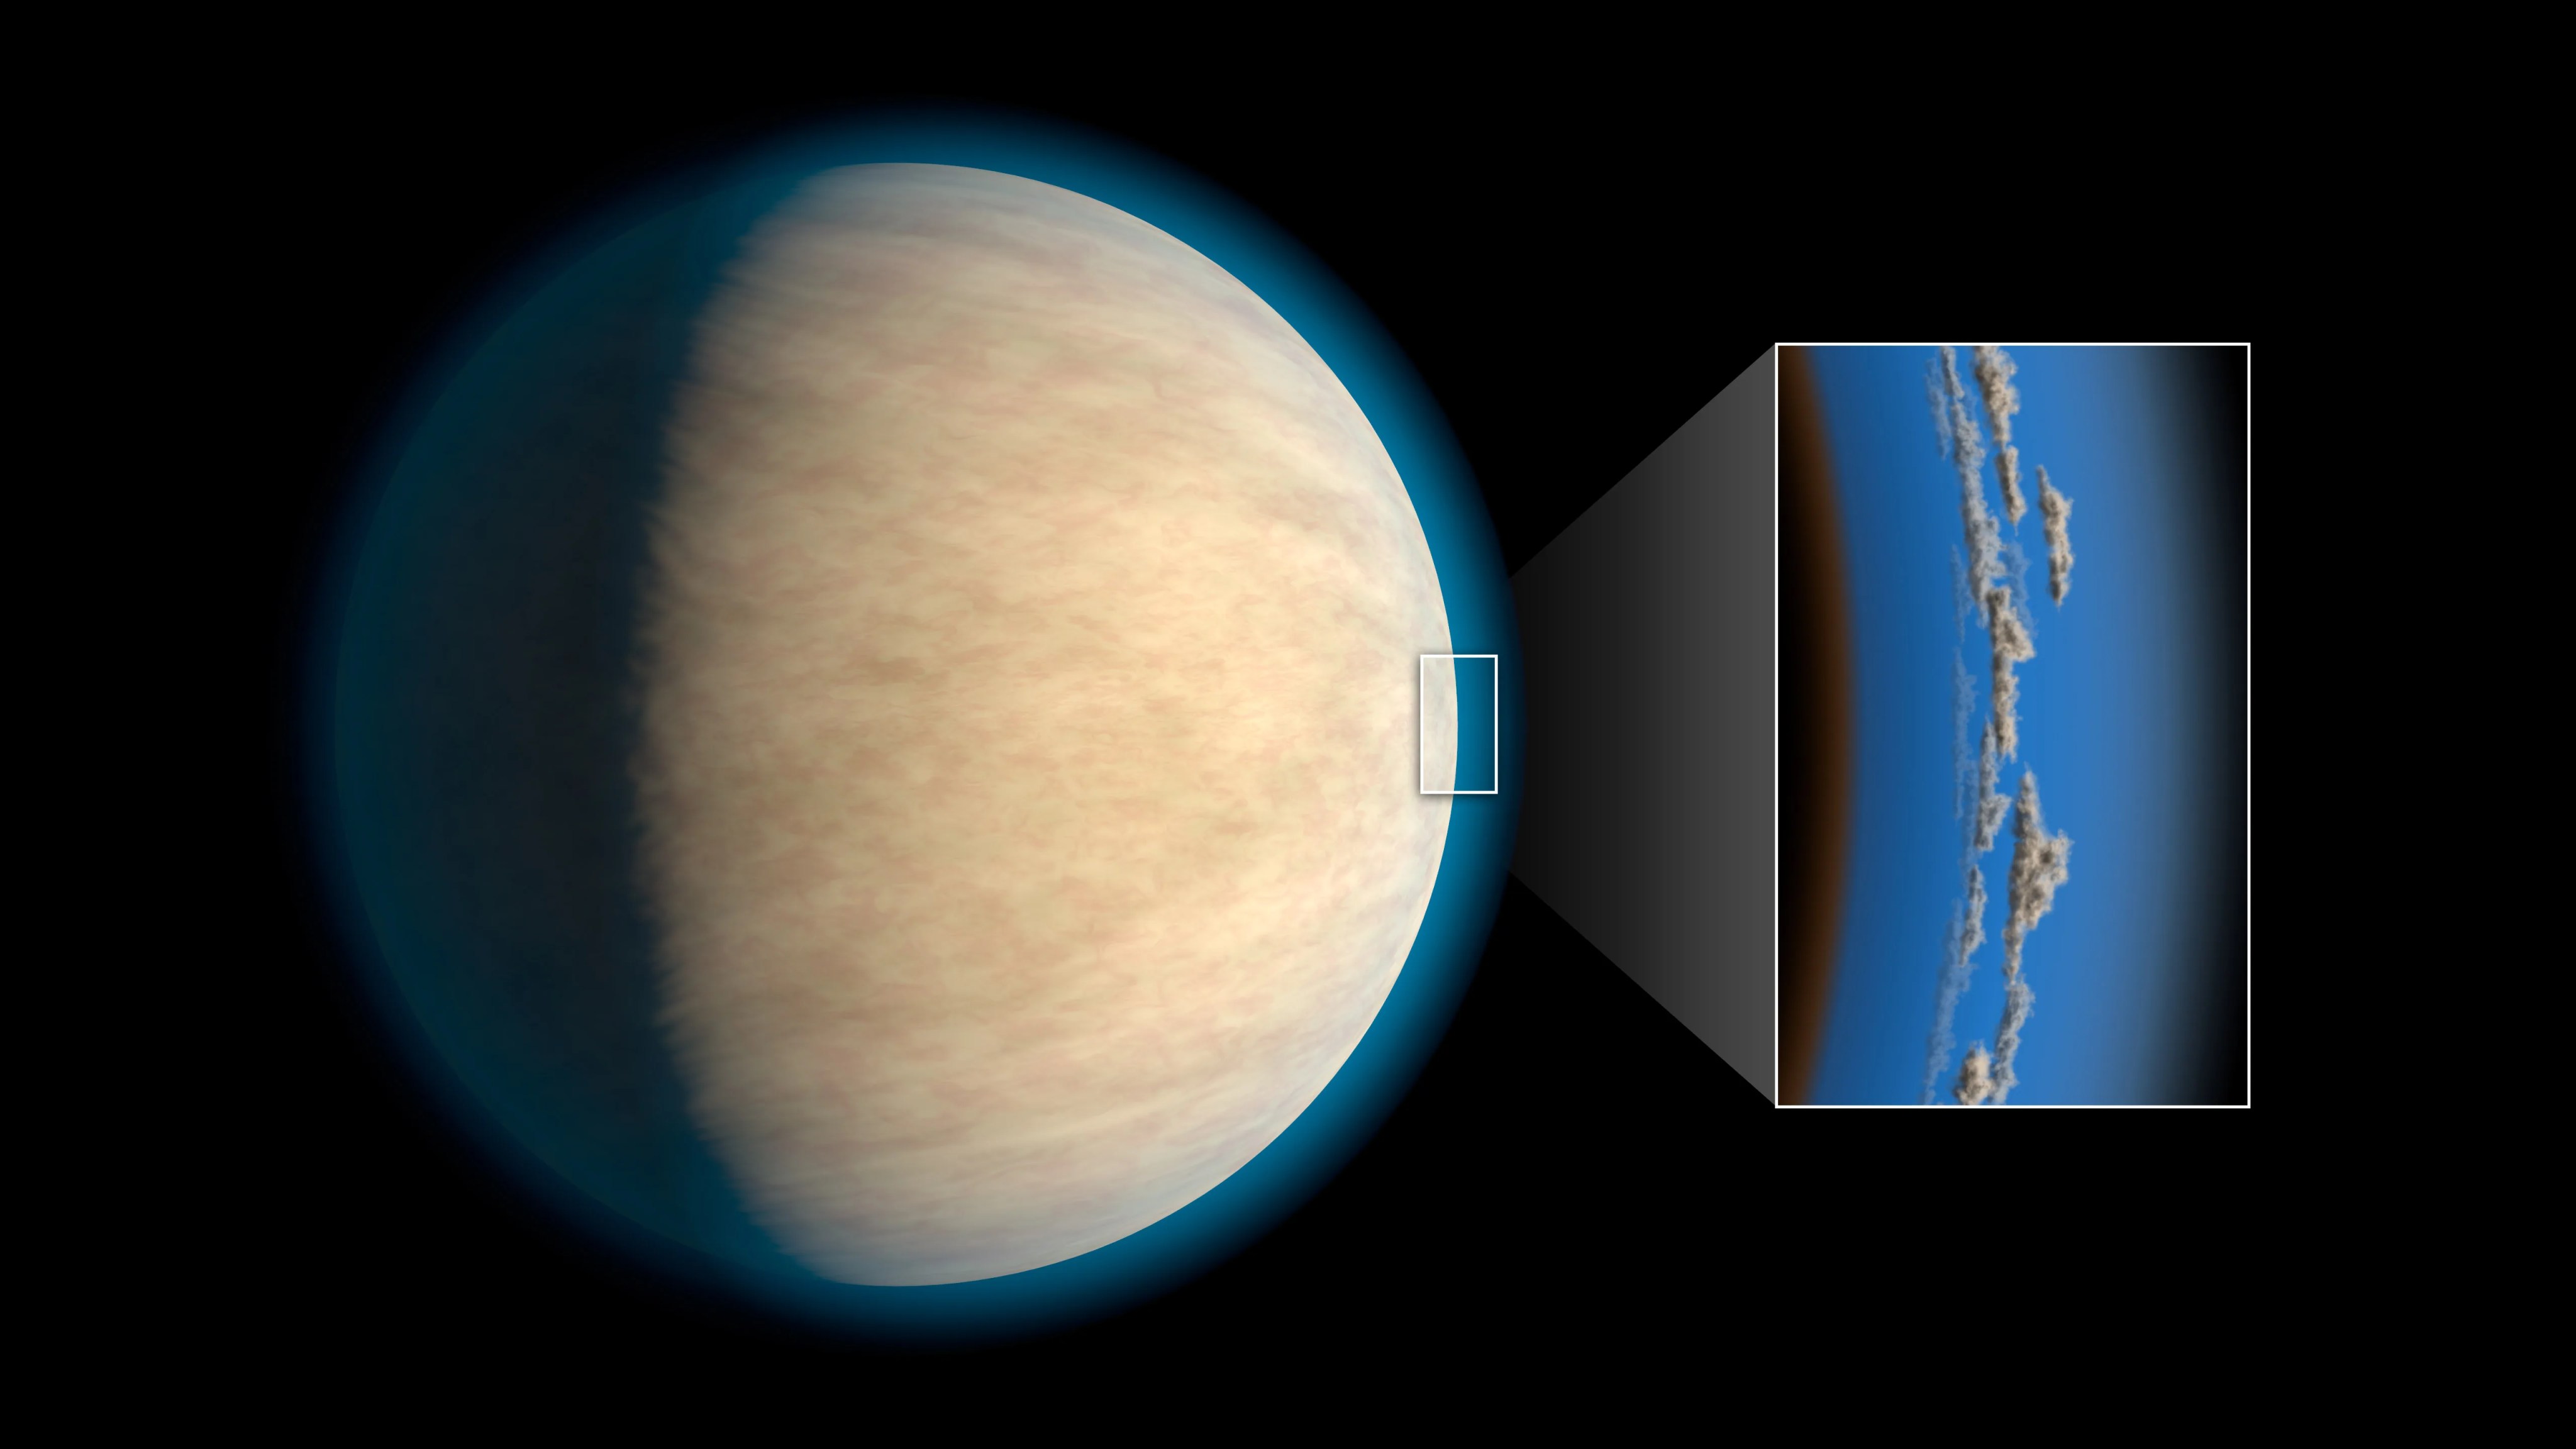 Artist's concept of hot jupiters shows a beige, hazy planet surrounded by a blue halo of atmosphere. A callout box shows clouds drifting above the planet's surface in a blue band.